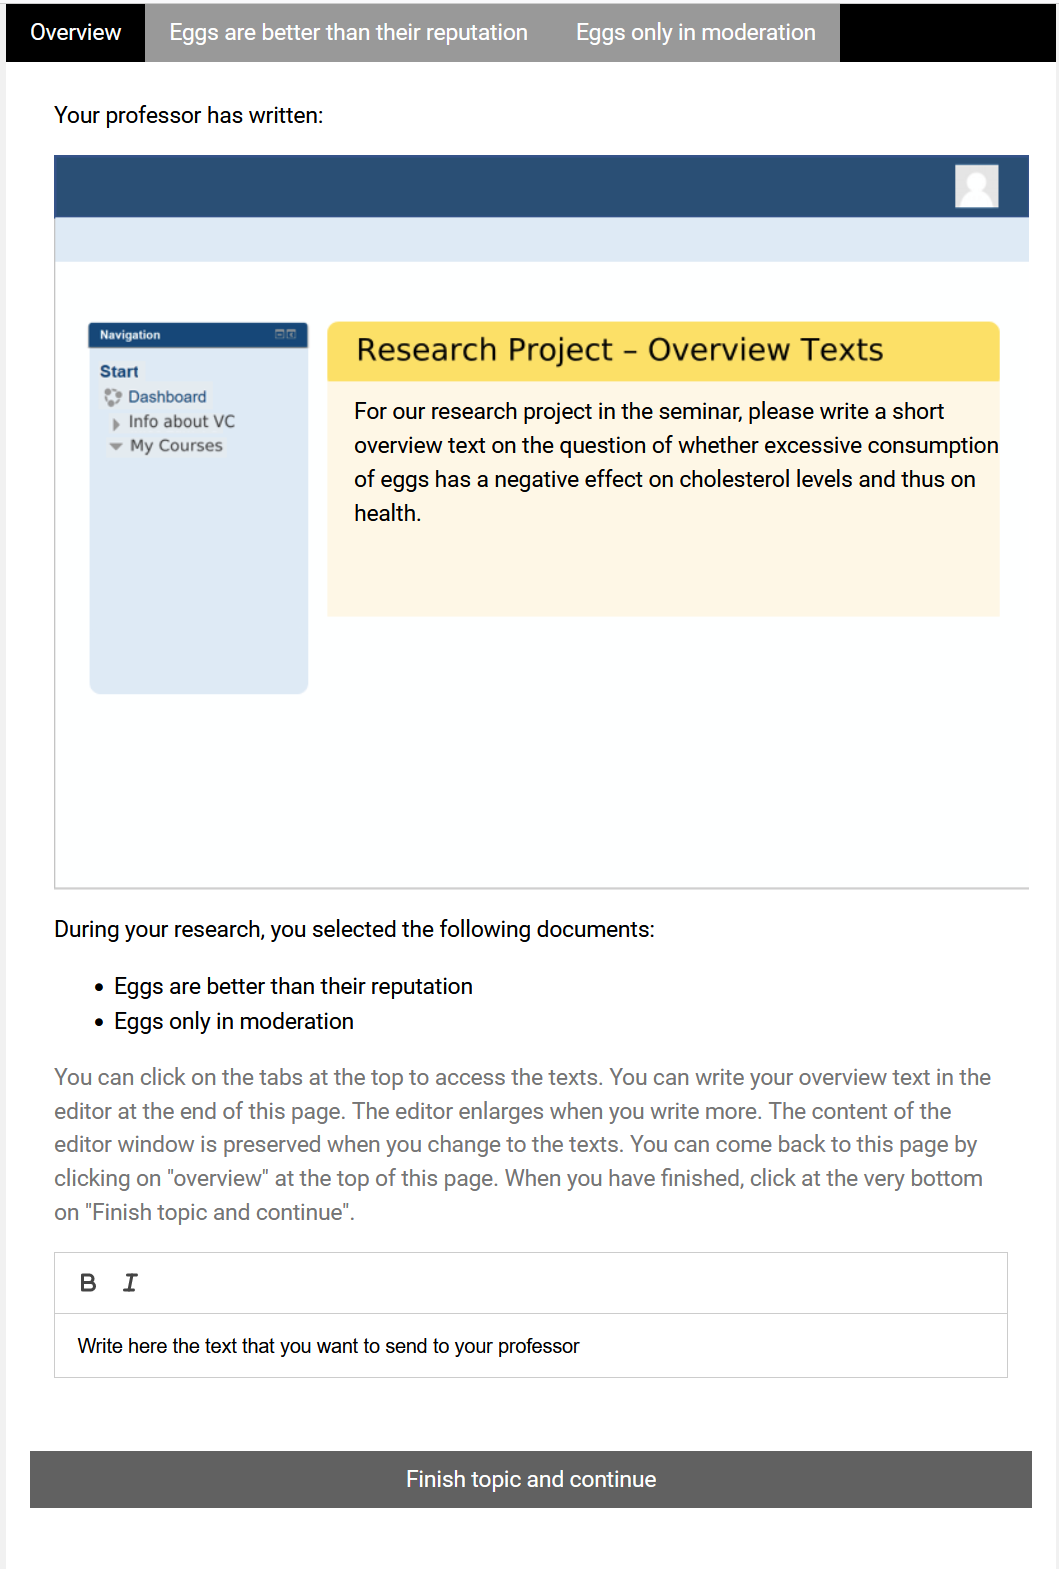 Screenshot (english translation) of the task in the university context